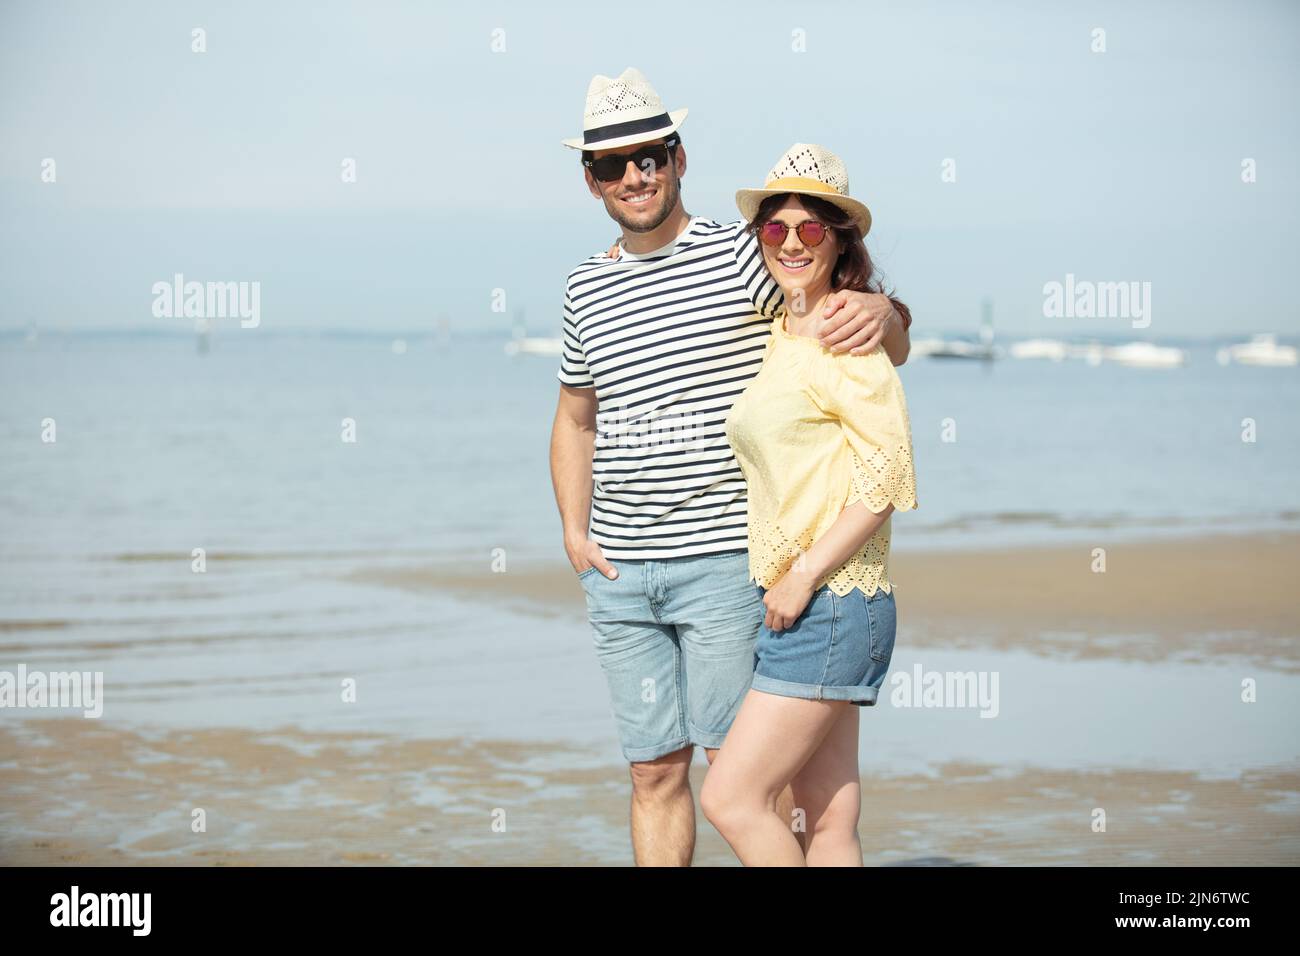 cheerful couple embracing and posing on the beach Stock Photo